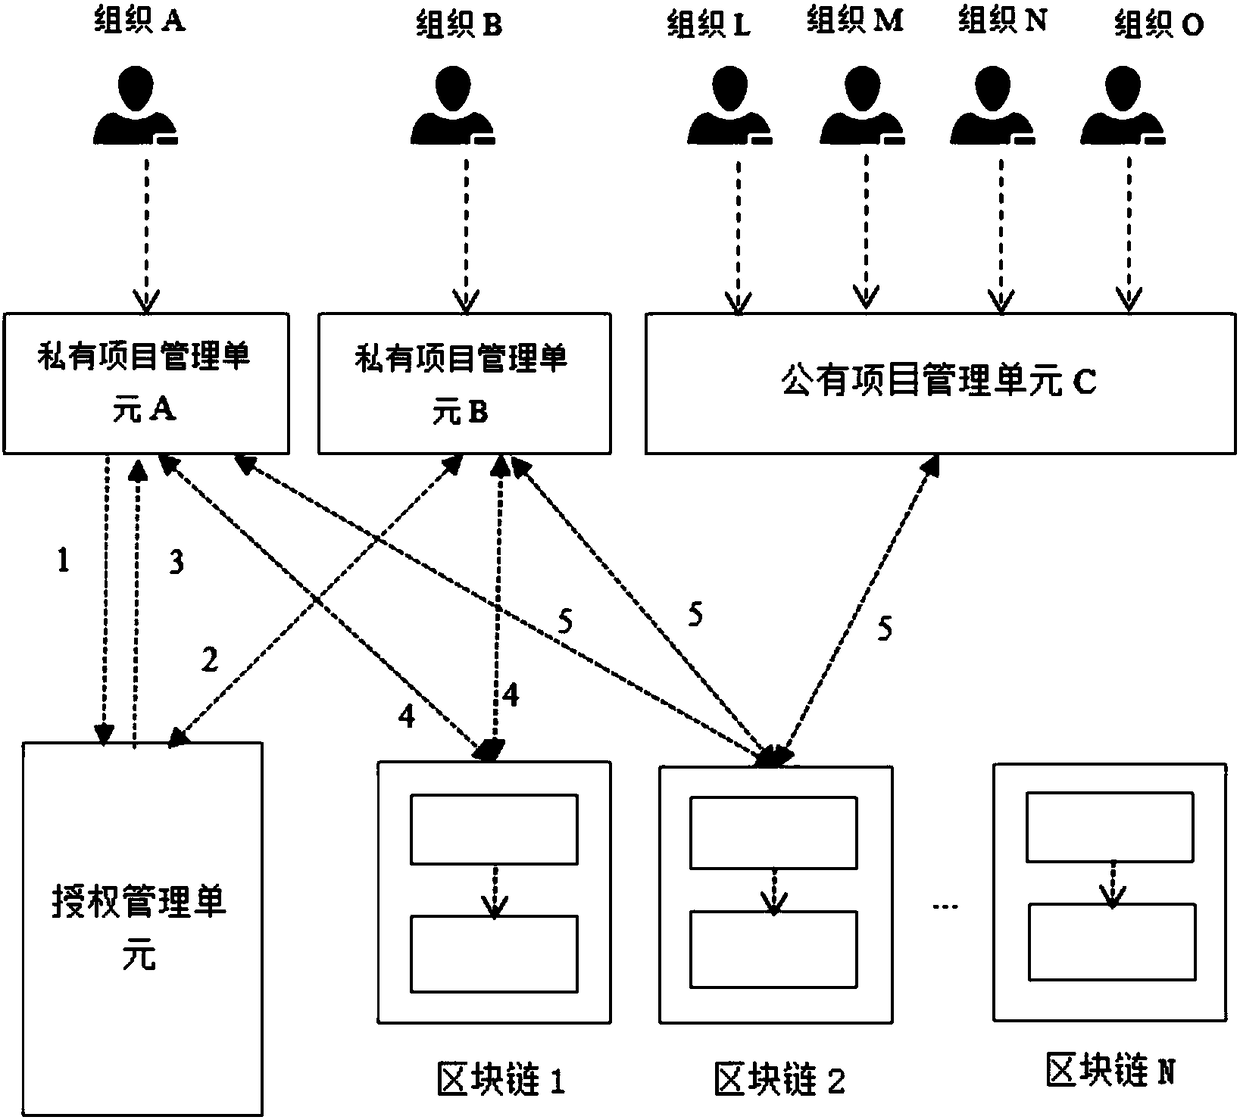 Blockchain-based trans-organization project management method and system, device and medium